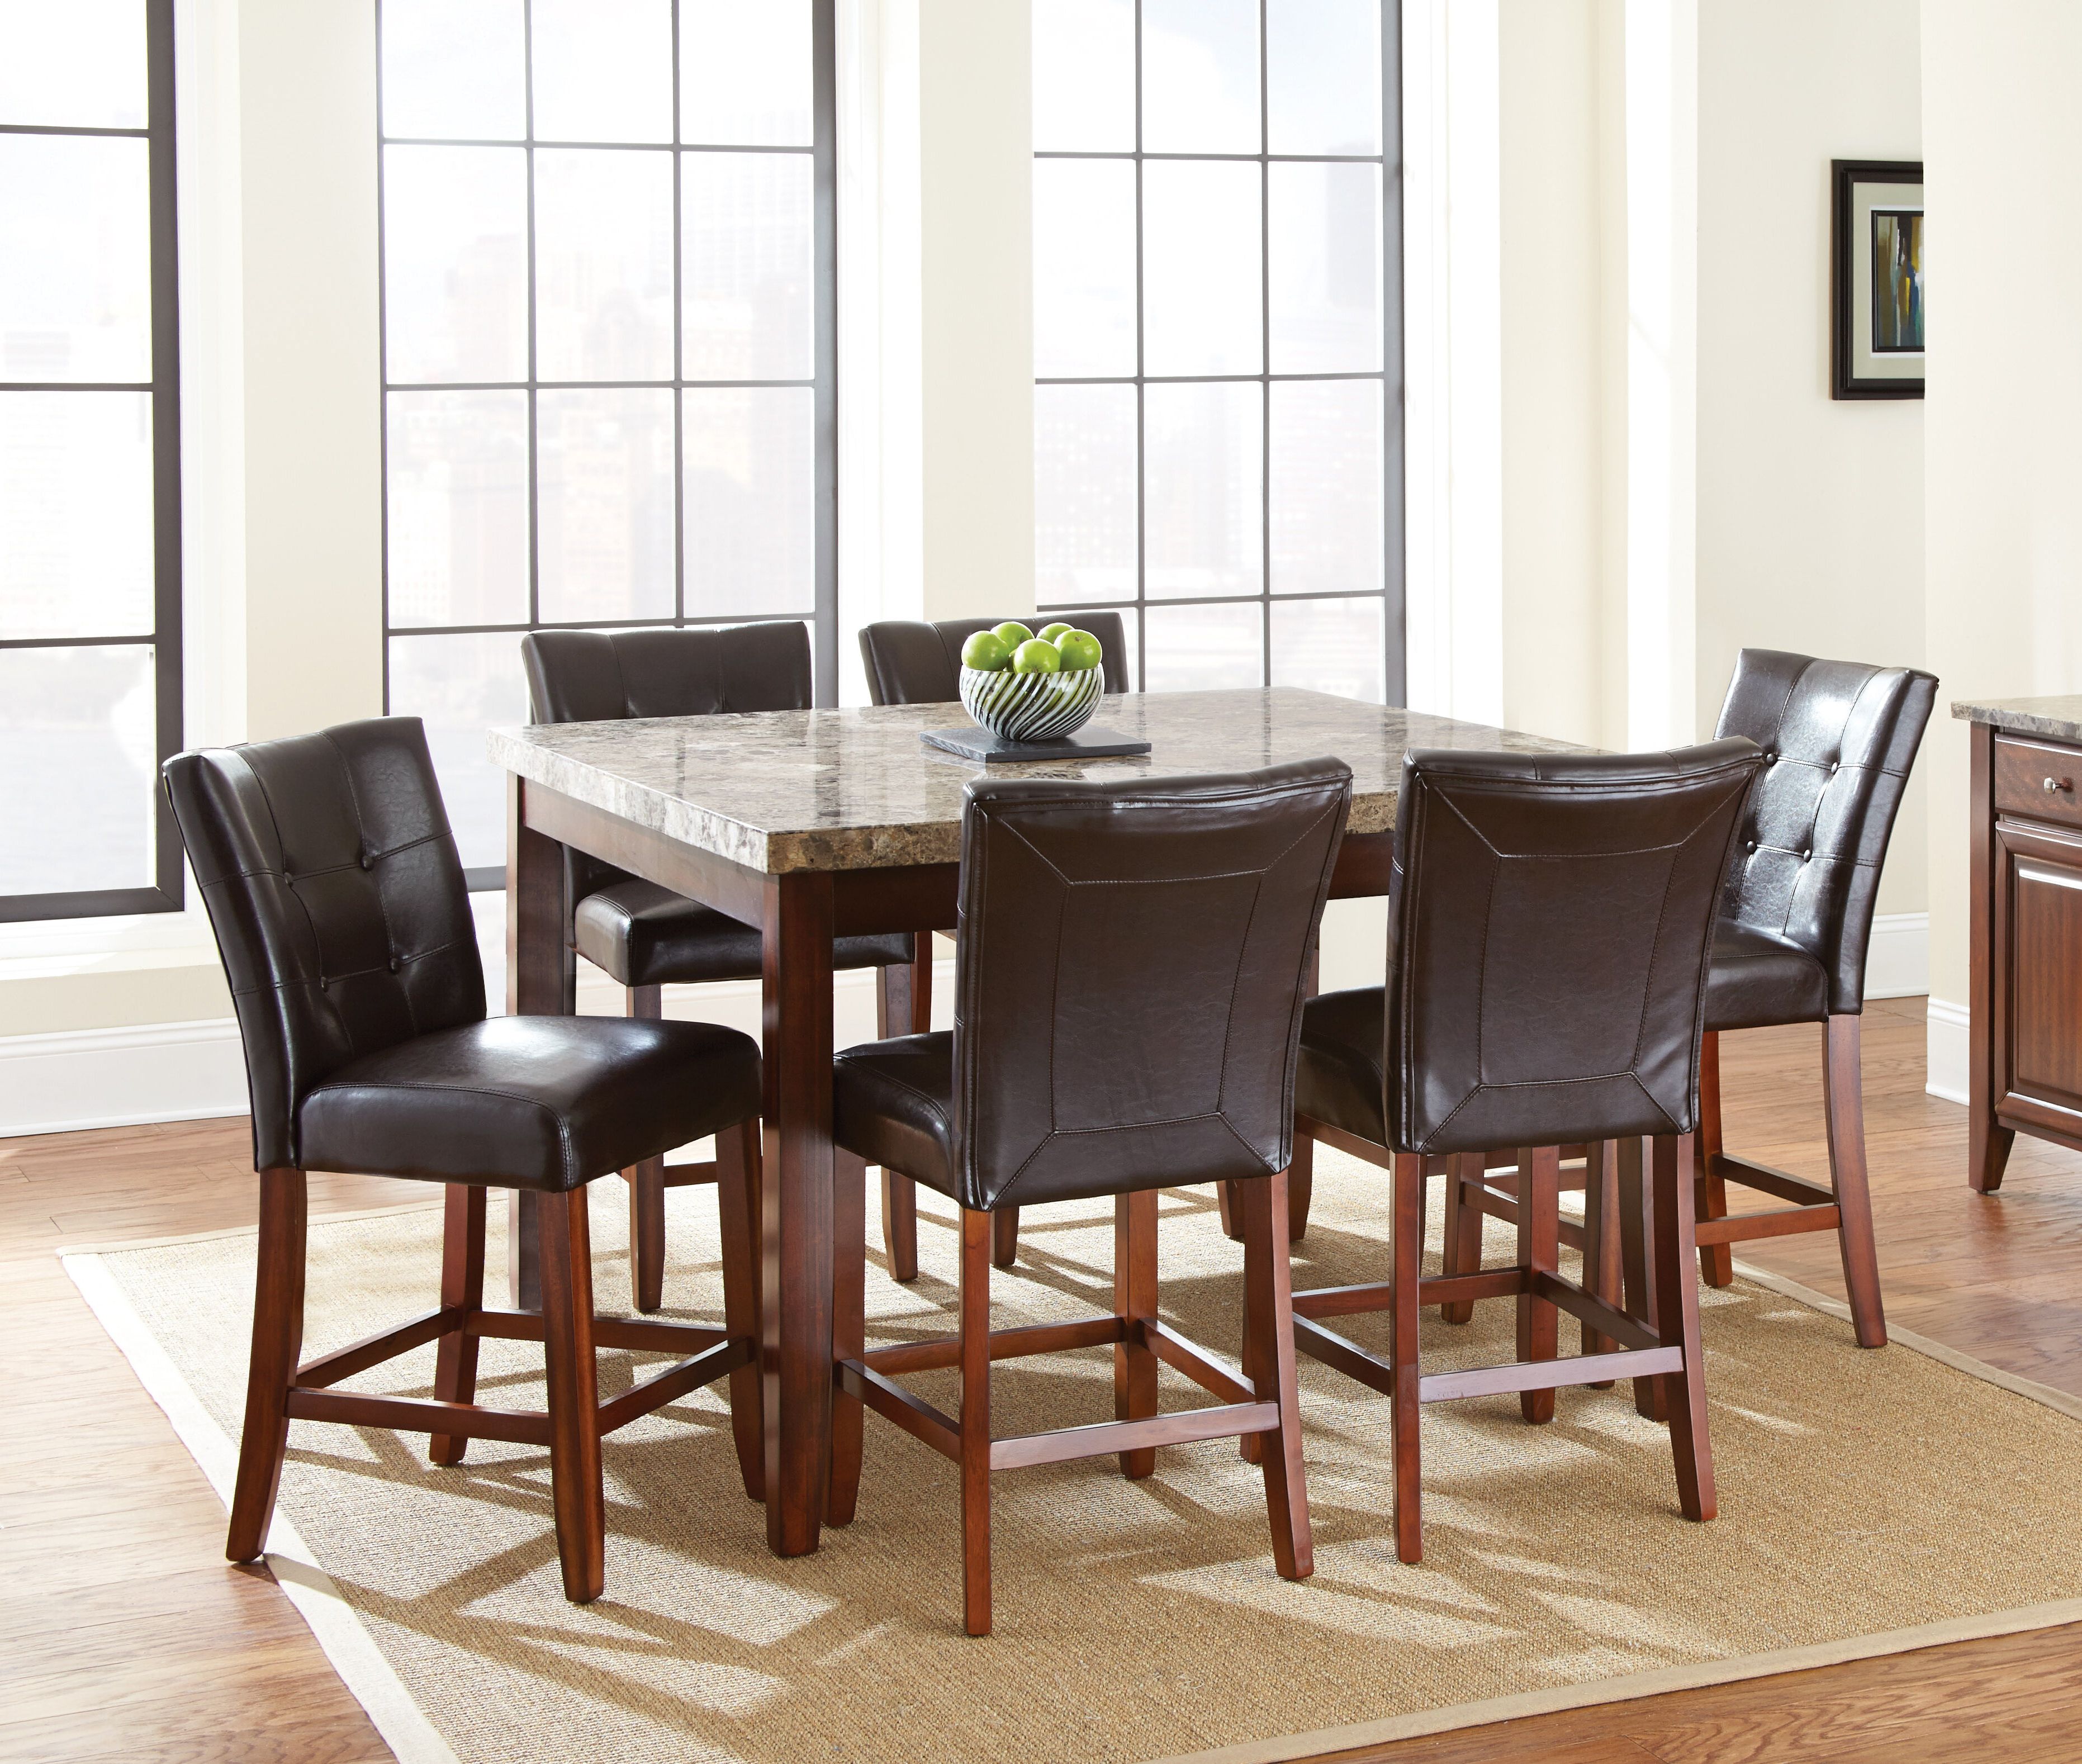 Lawhon 7 Piece Pub Table Set Regarding Current Askern 3 Piece Counter Height Dining Sets (set Of 3) (View 12 of 20)